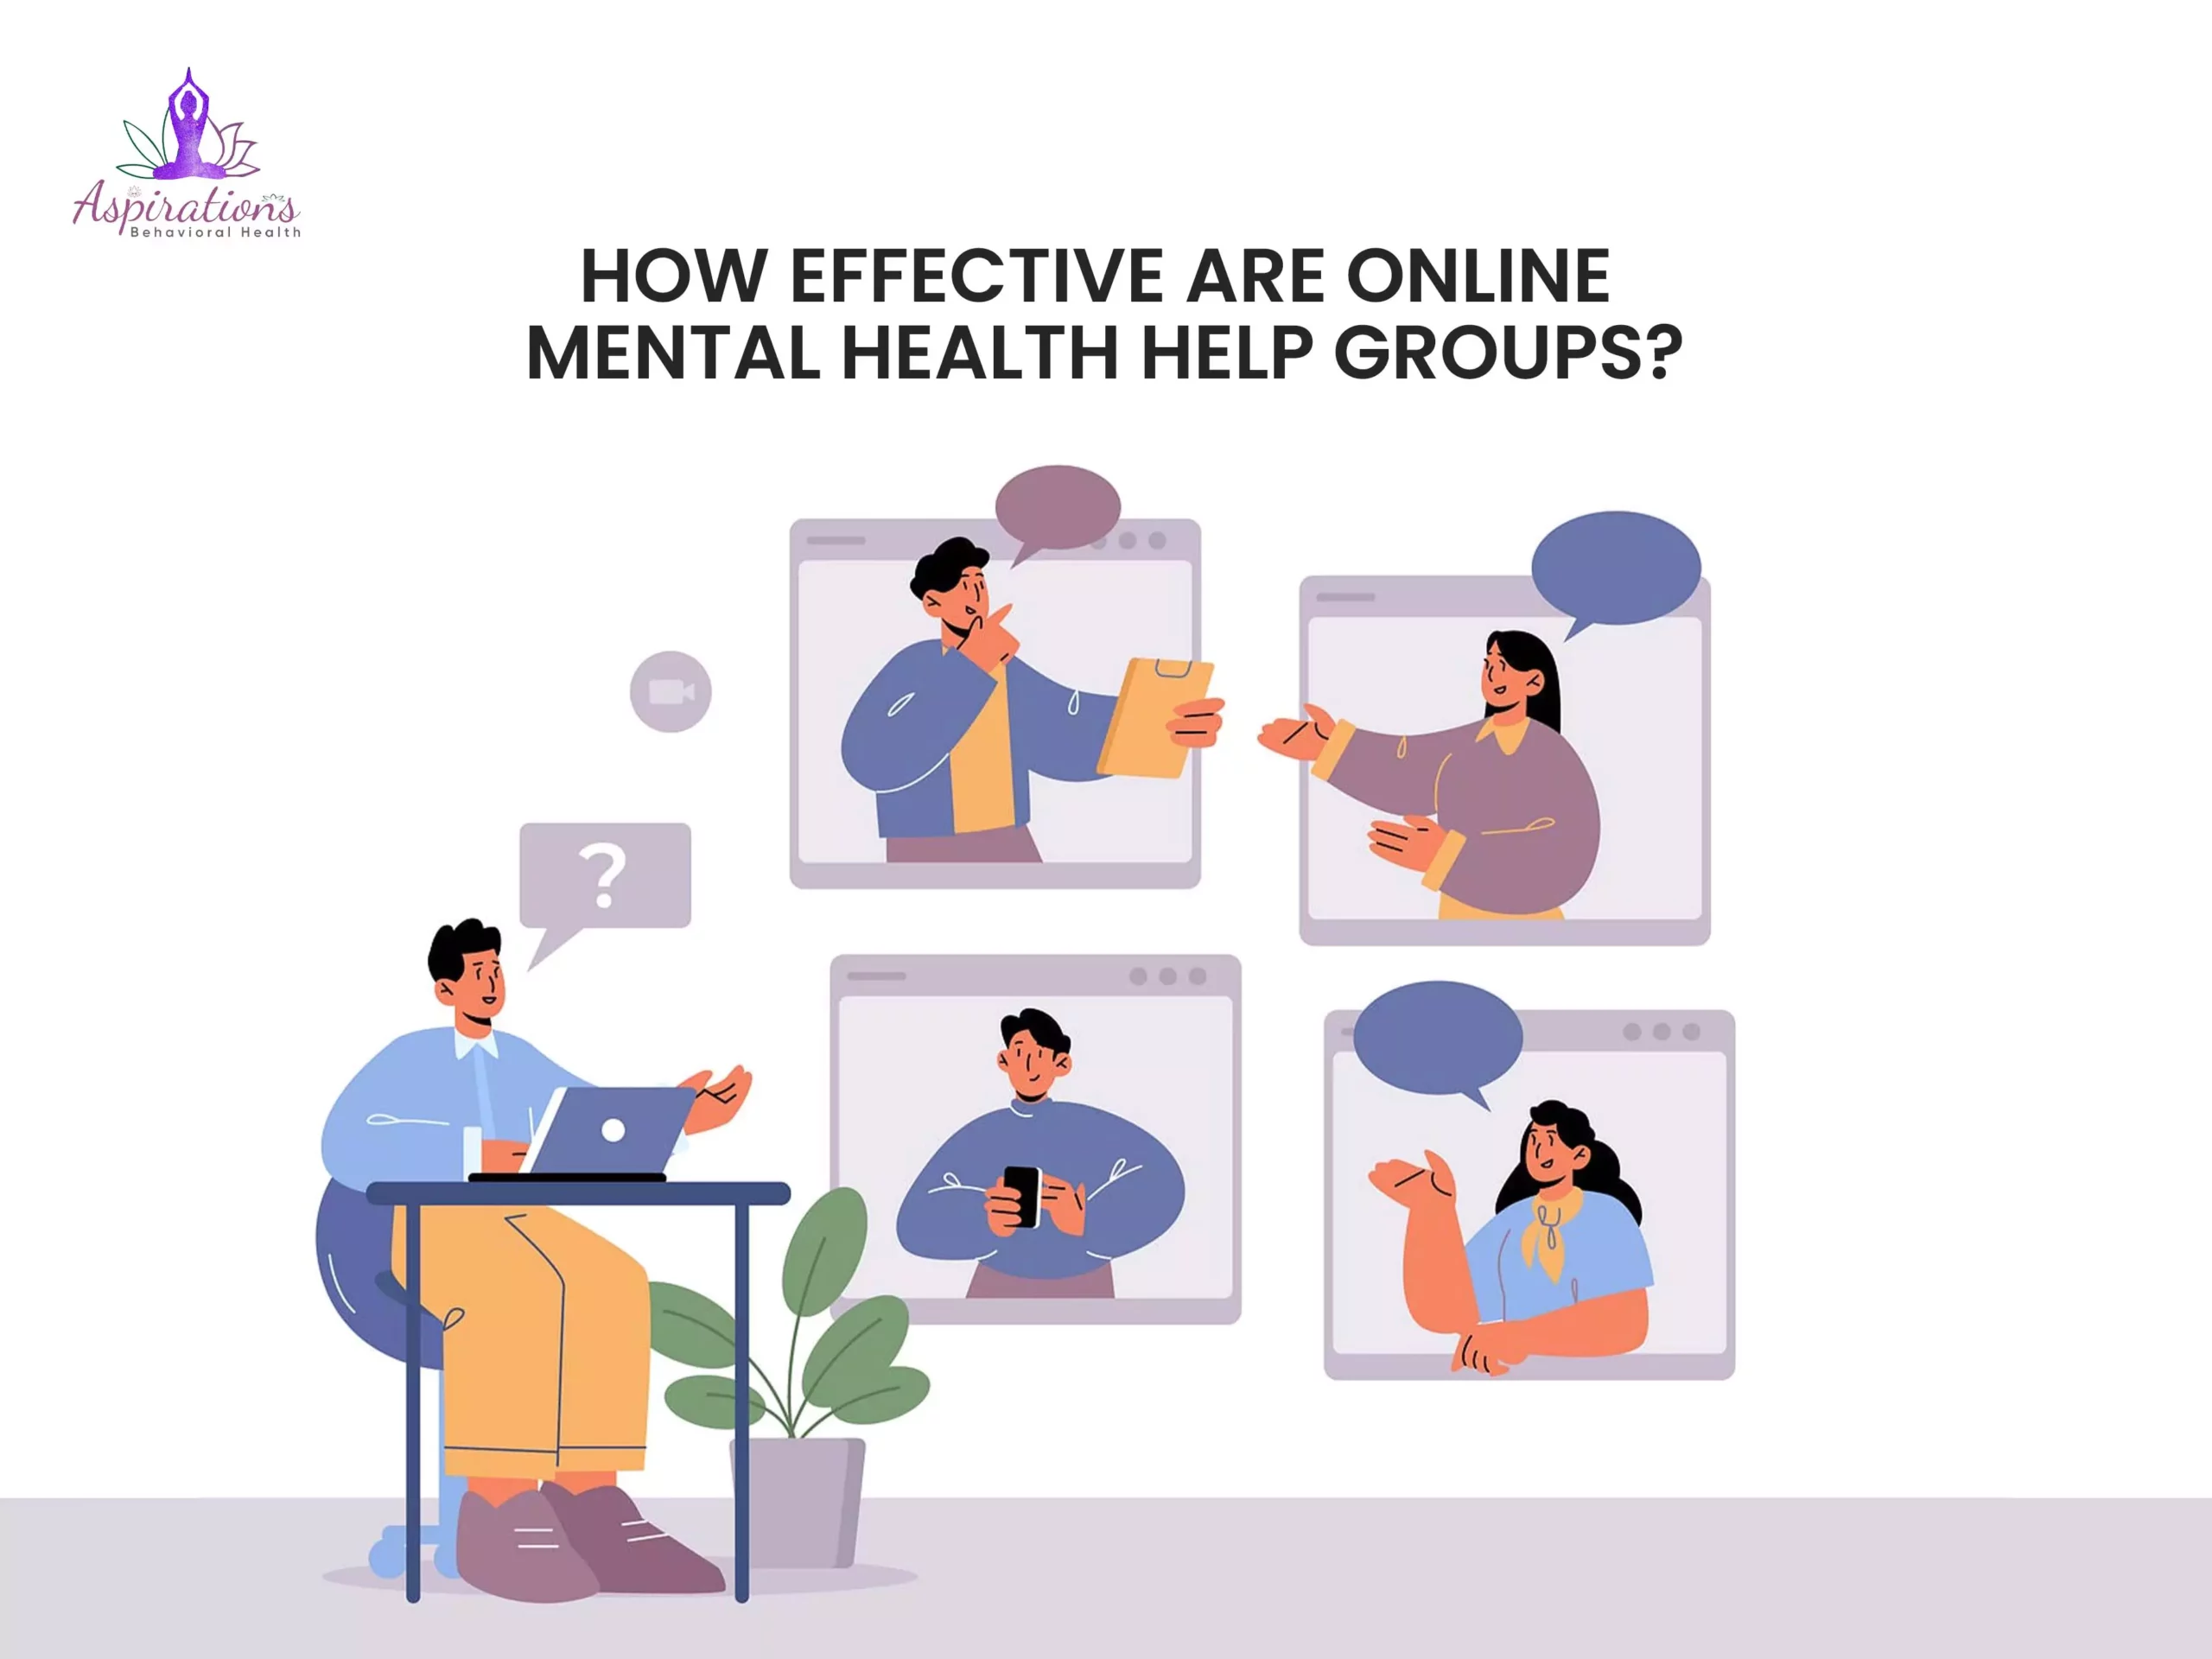 How Effective Are Online Mental Health Help Groups?